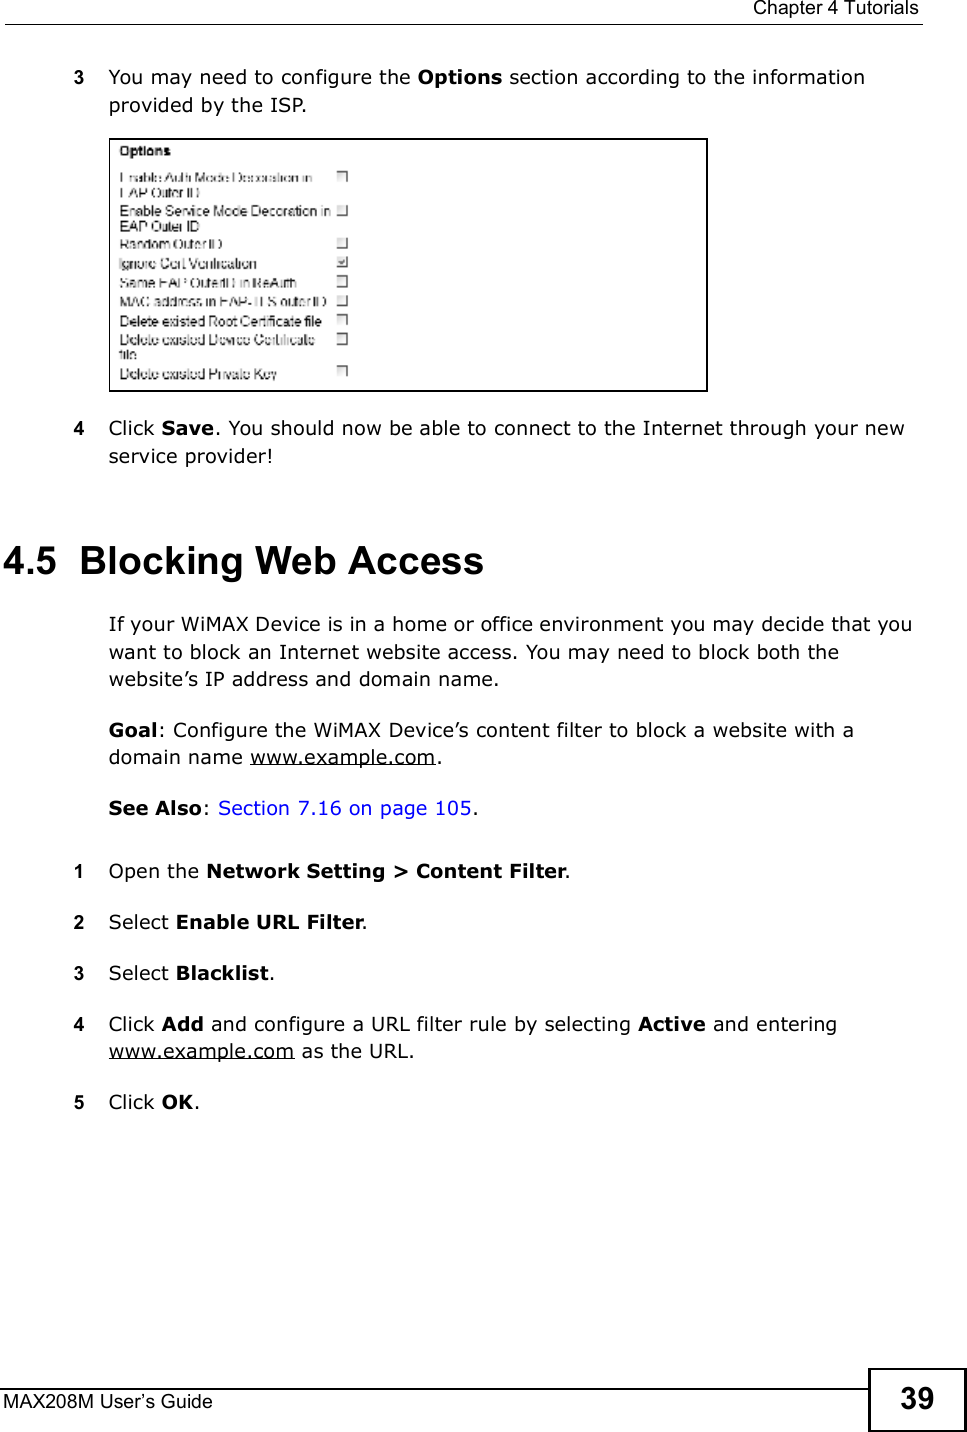  Chapter 4TutorialsMAX208M User s Guide 393You may need to configure the Options section according to the information provided by the ISP.4Click Save. You should now be able to connect to the Internet through your new service provider!4.5  Blocking Web AccessIf your WiMAX Device is in a home or office environment you may decide that you want to block an Internet website access. You may need to block both the website s IP address and domain name.Goal: Configure the WiMAX Device s content filter to block a website with a domain name www.example.com.See Also: Section 7.16 on page 105.1Open the Network Setting &gt; Content Filter.2Select Enable URL Filter.3Select Blacklist.4Click Add and configure a URL filter rule by selecting Active and entering www.example.com as the URL.5Click OK.